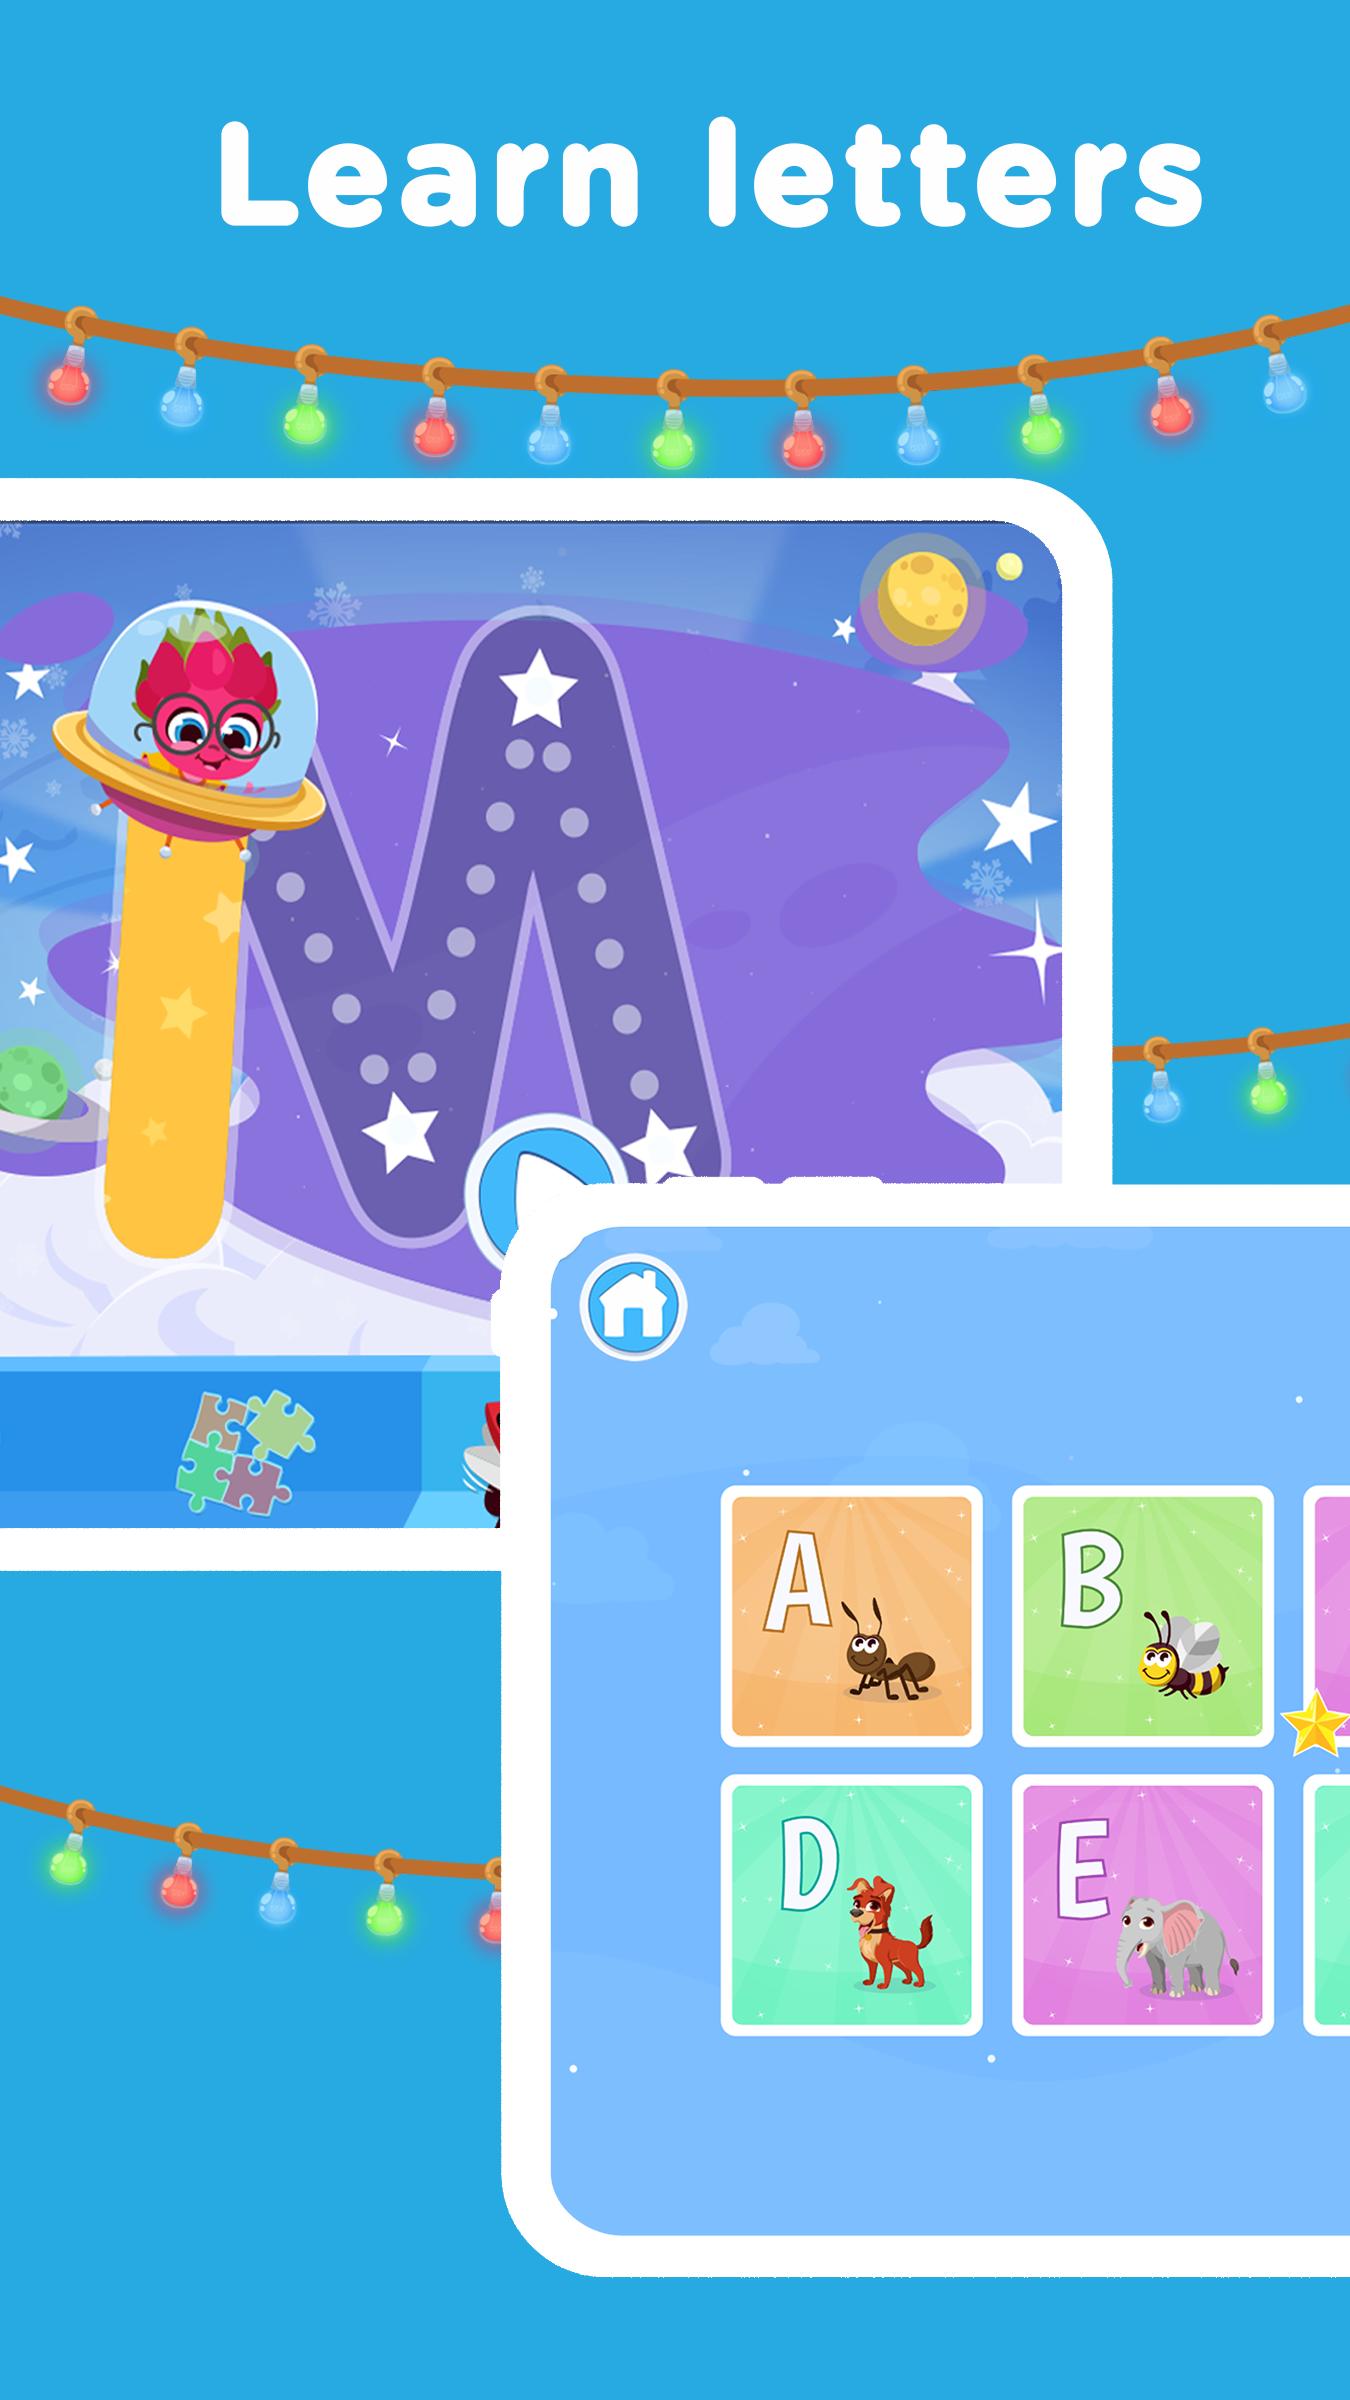 Keiki - ABC Letters Puzzle Games for Kids & Babies 1.9.1 Screenshot 5